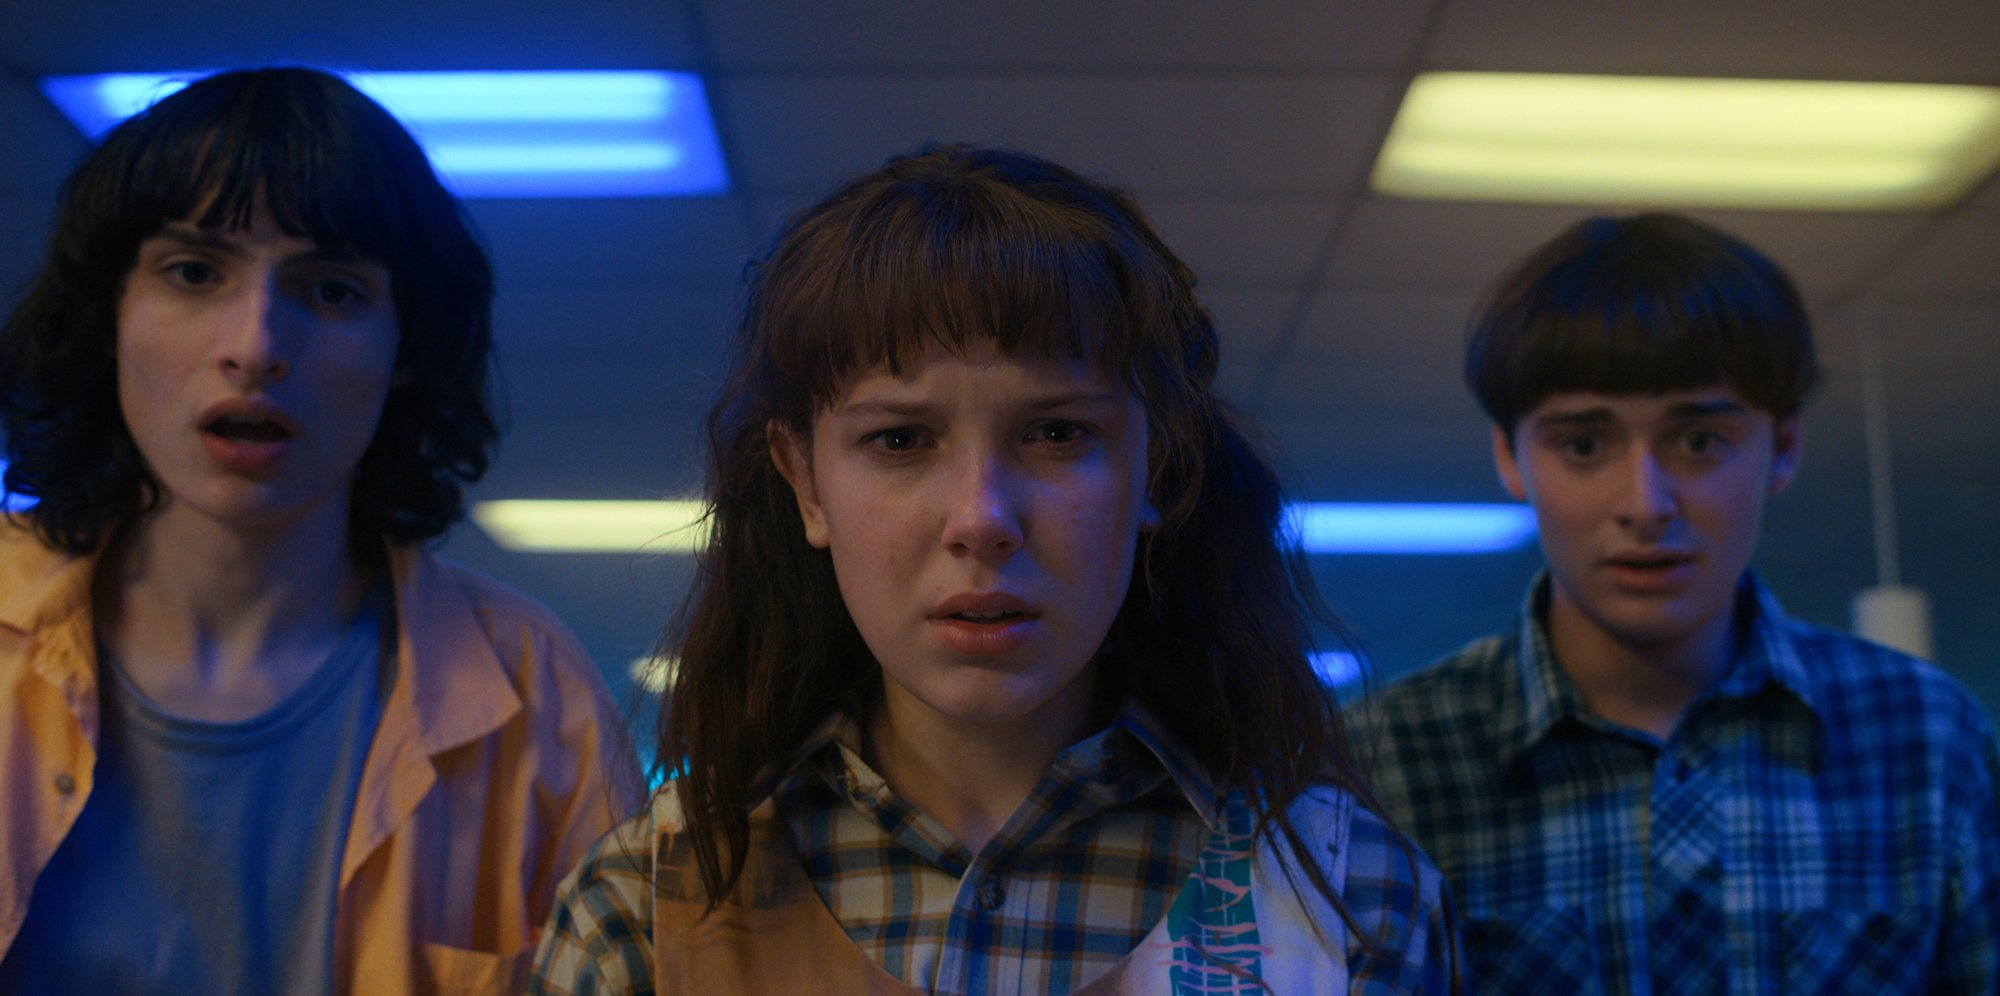 'Stranger Things' Season 4 still showing Eleven, with all her hair, standing between Mike and Will at a roller rink.